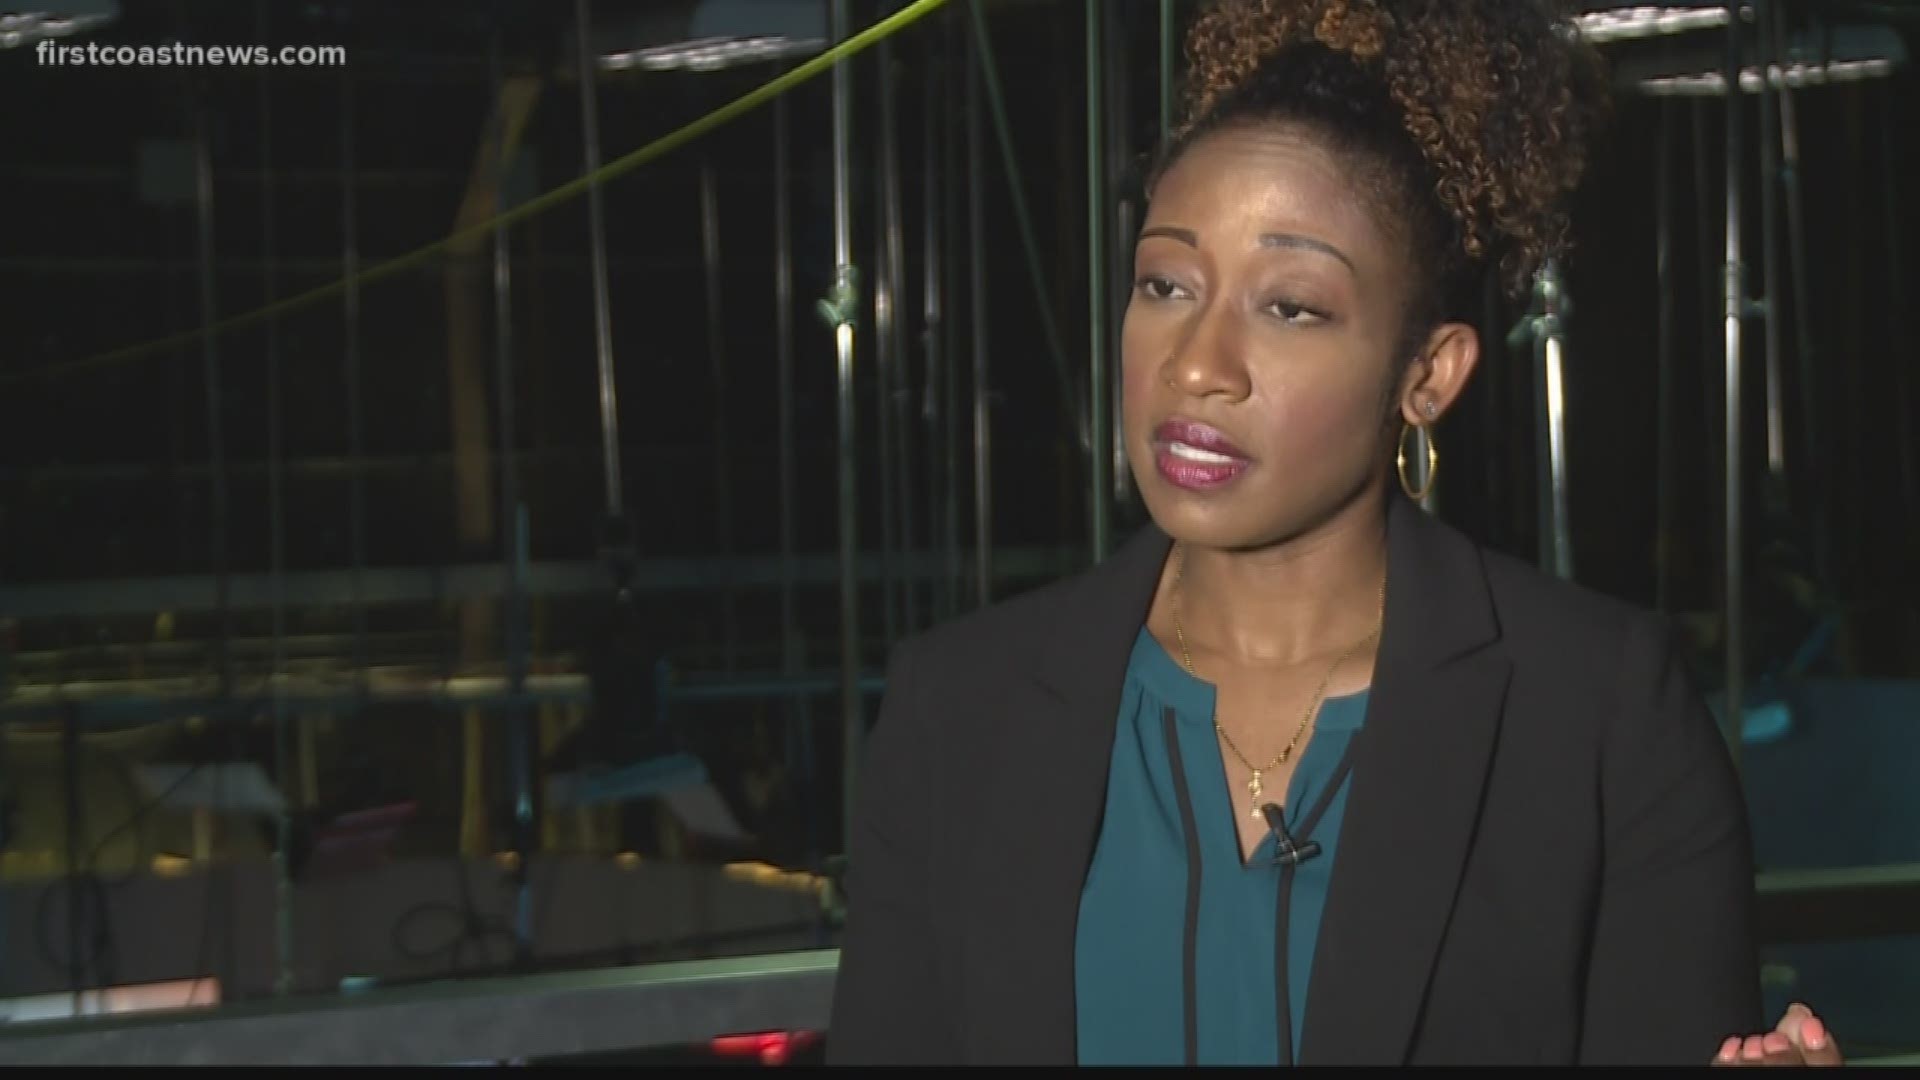 Marissa Alexander has launched a social media campaign called "Vote for Me."